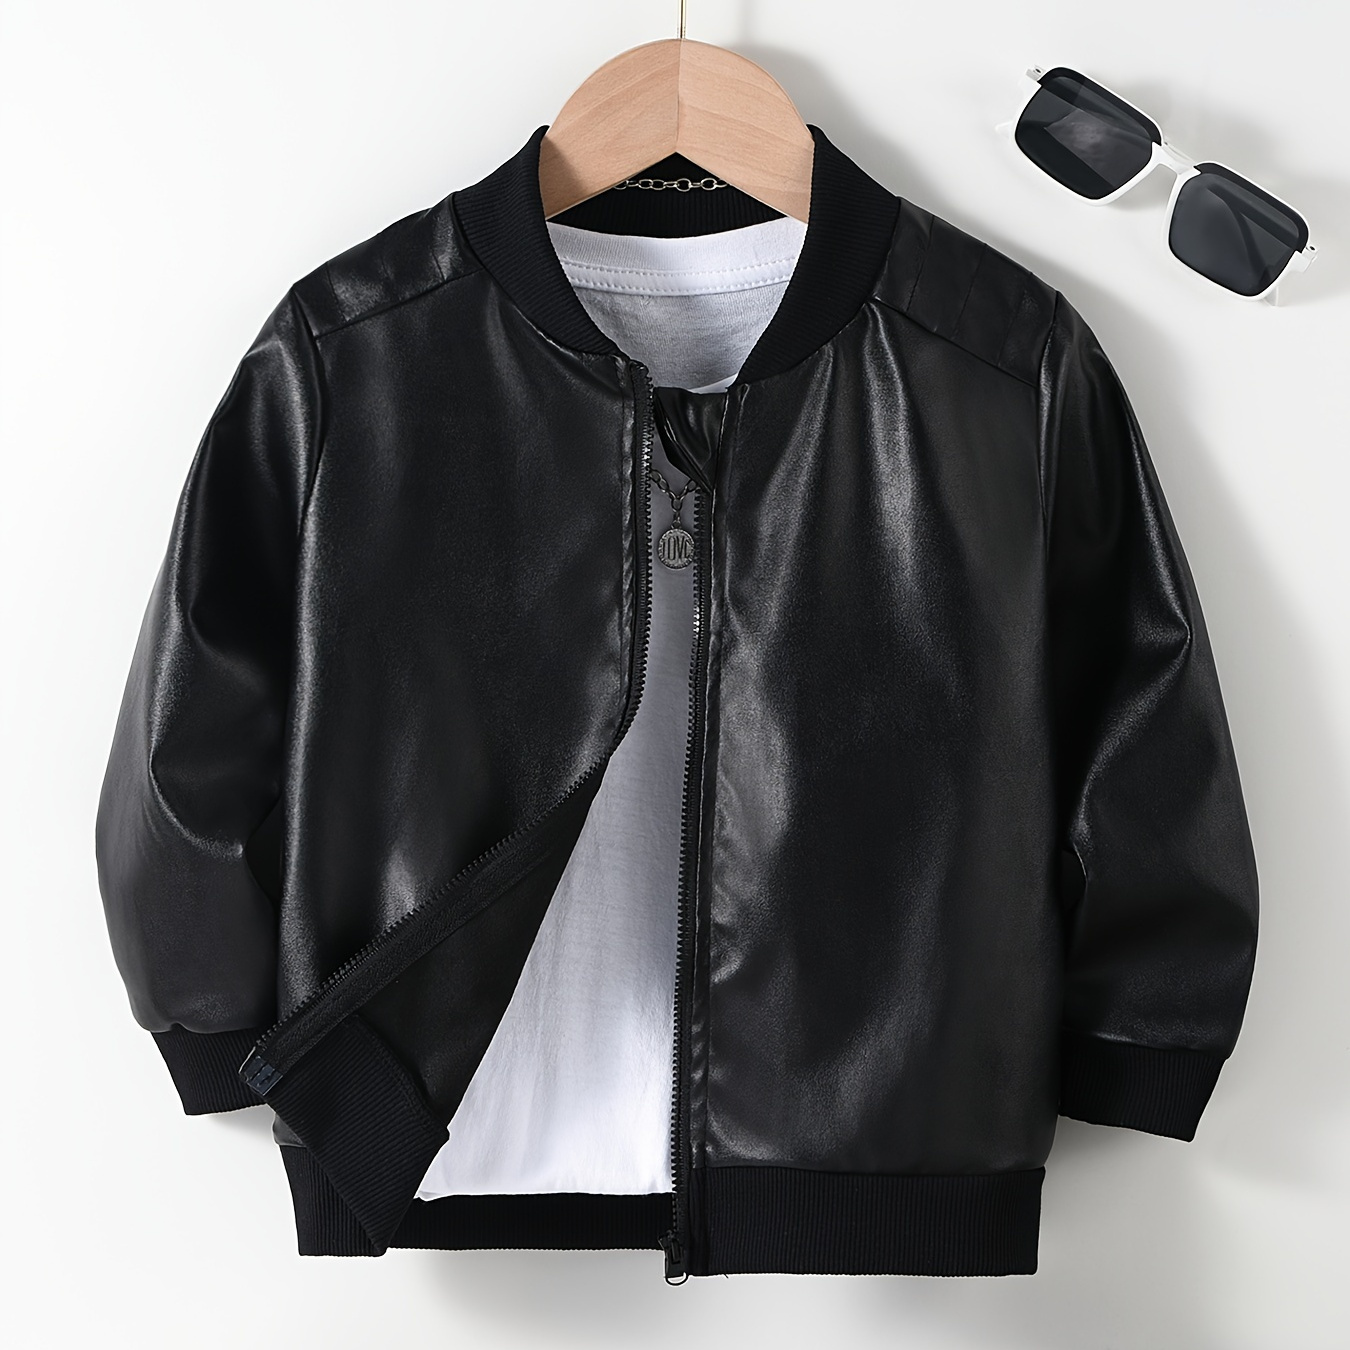 

Boys Trendy Pu Leather Biker Jacket, Zip Up Bomber Jacket, Kids Clothes For Autumn And Winter